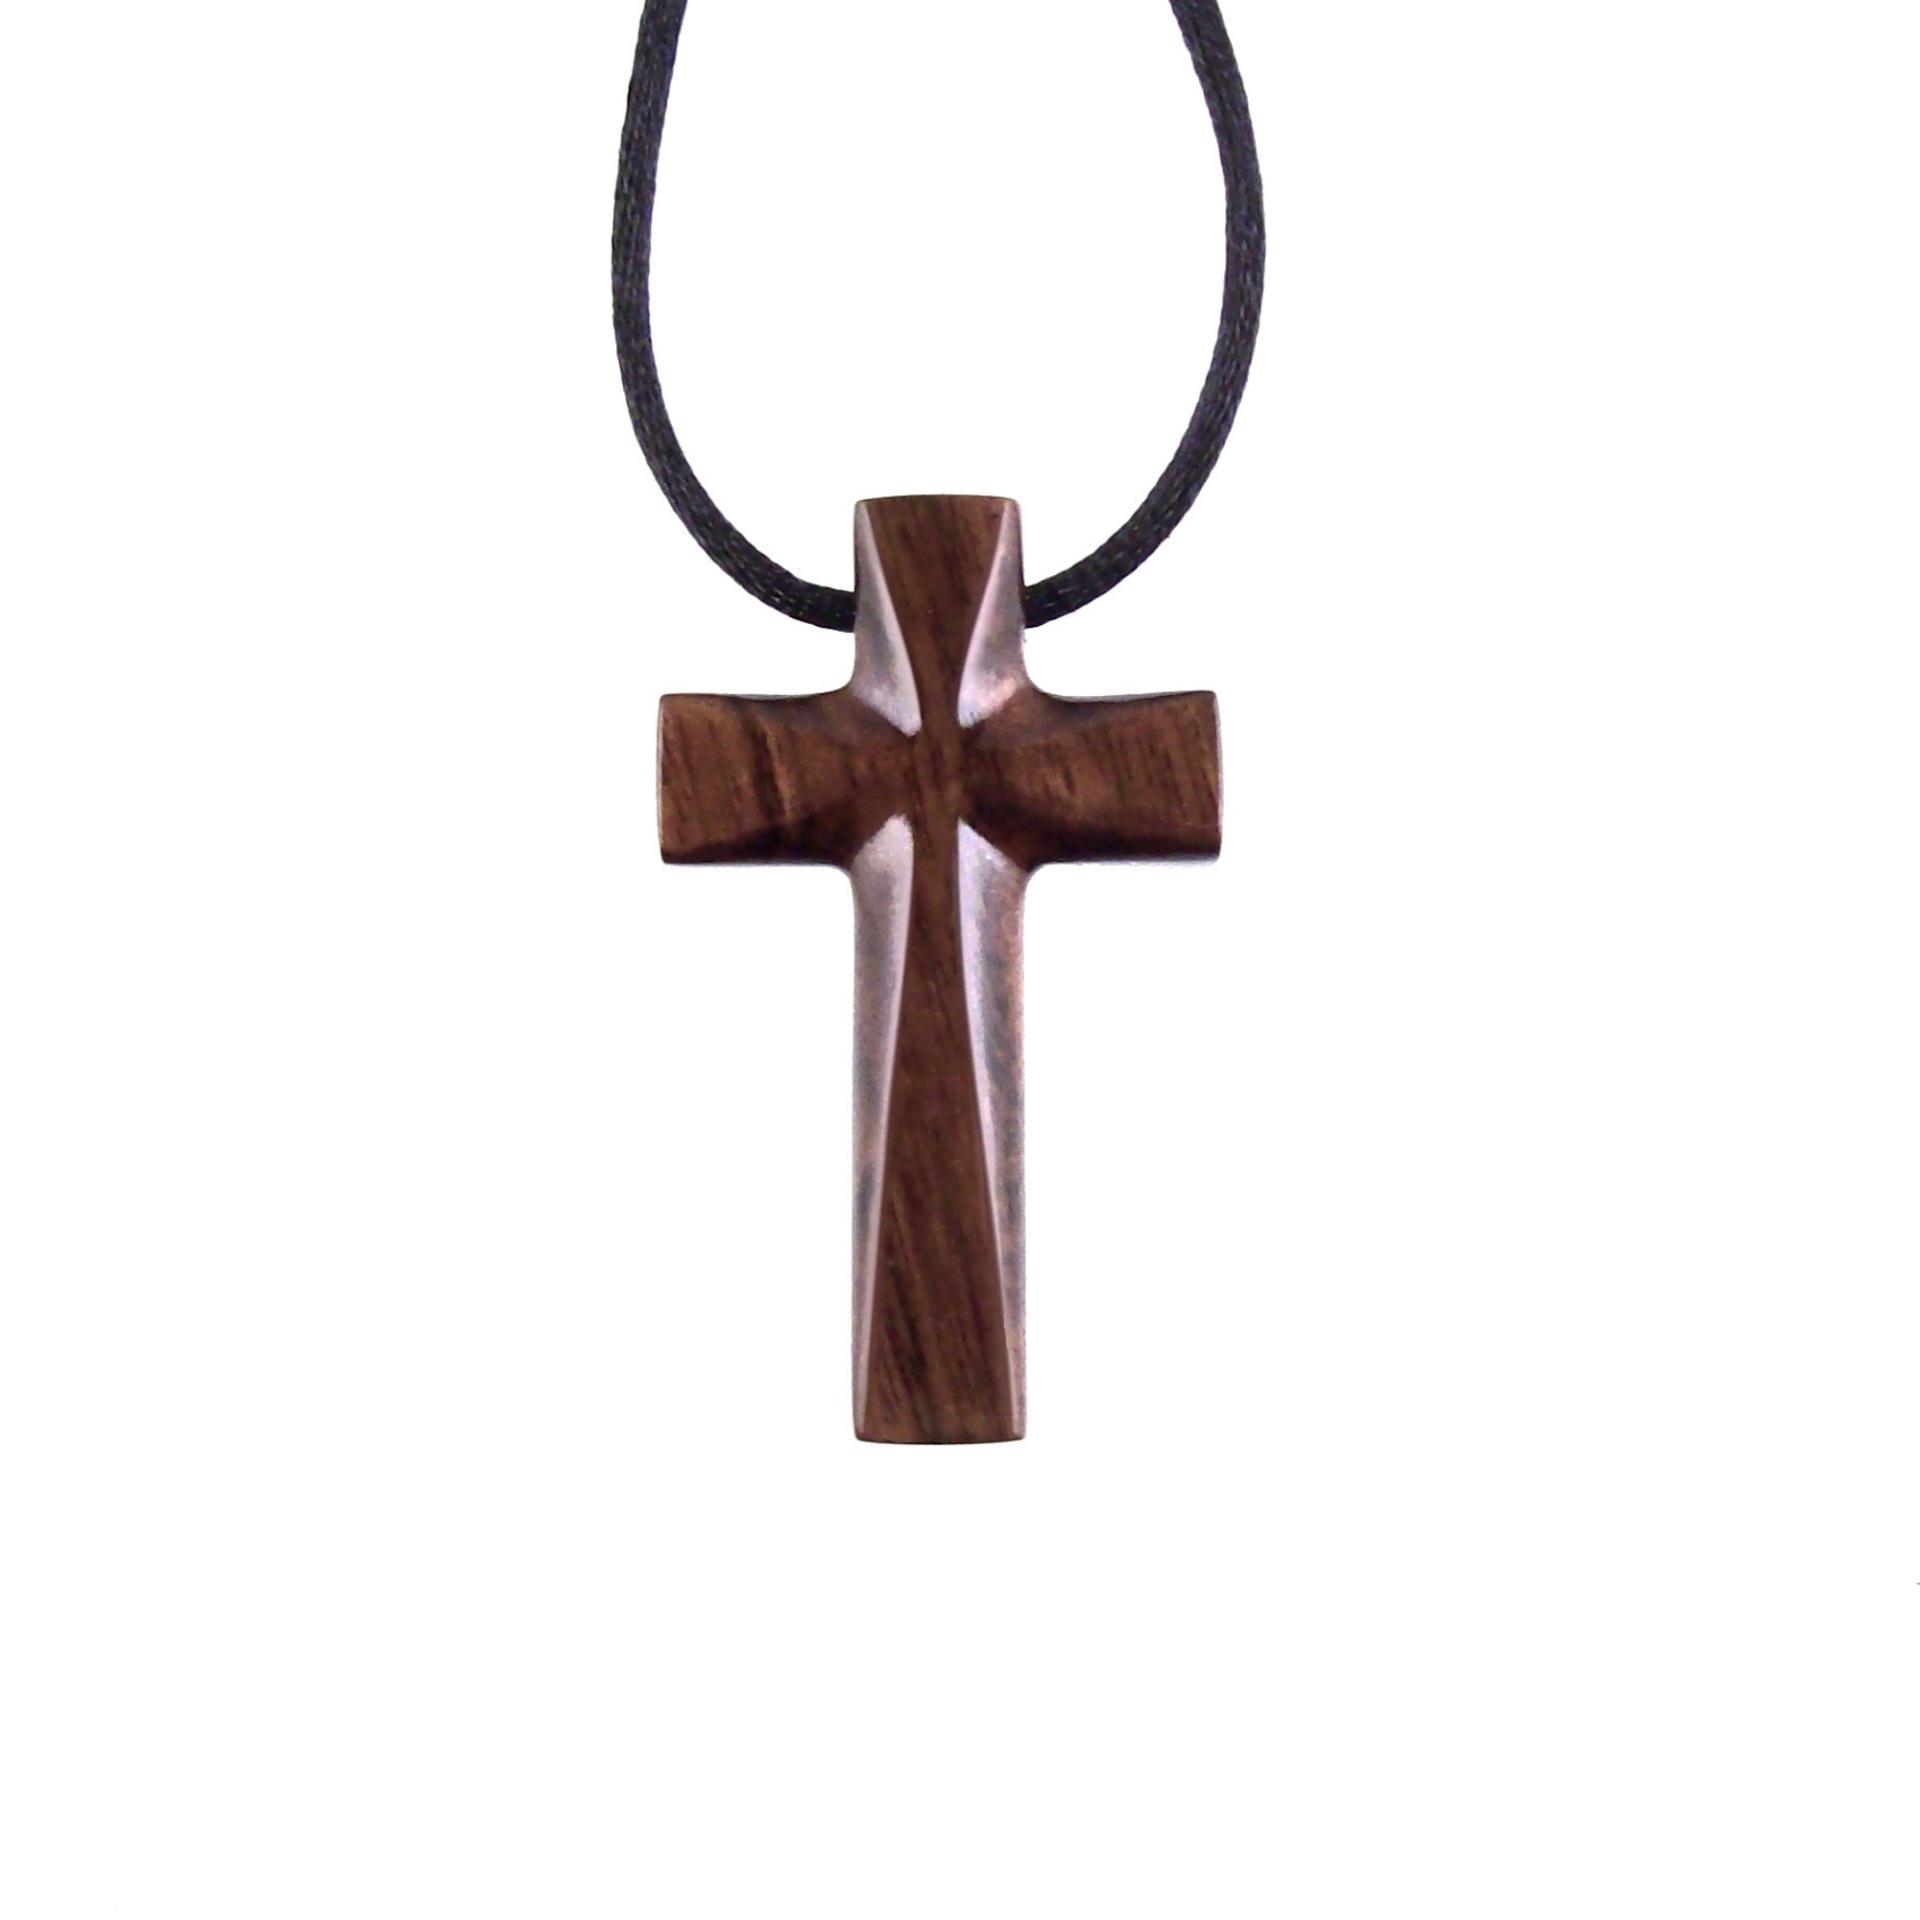 Hand Carved Wooden Cross Pendant, Handmade Wood Cross Necklace, Mens Christian Jewelry, One of a Kind Gift for Him